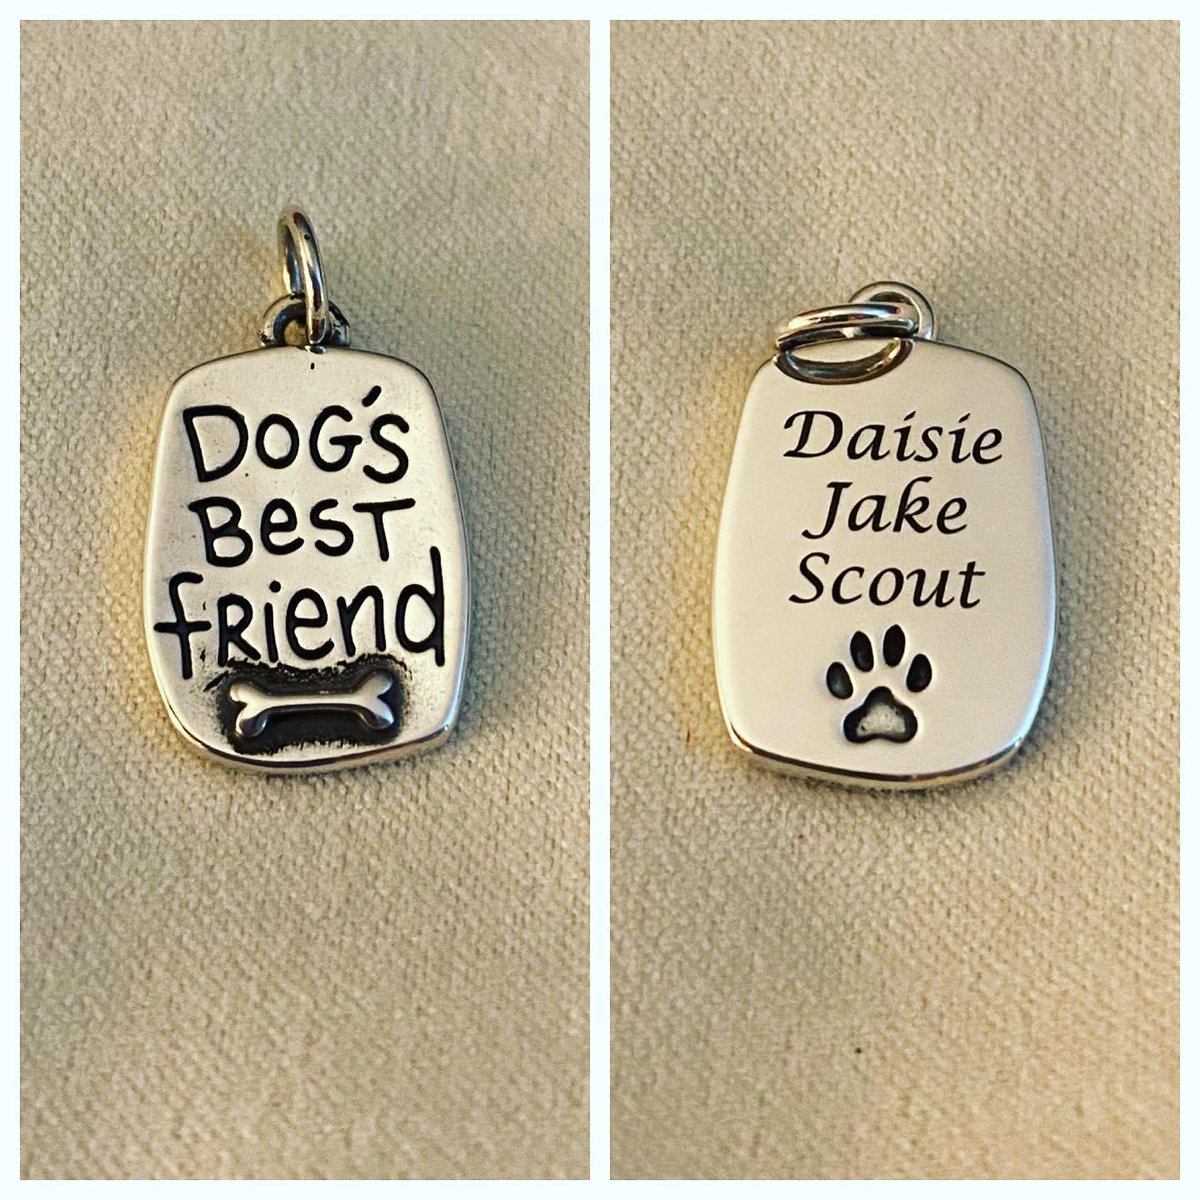 We ❤ how this Customer commemorated the friendship with her pups by engraving the back of the 'Dog's Best Friend' Charm. Shop the look at bit.ly/39ac5Lw. 

📸: 3dog_rescue_squad

#petcharm #dogcharm #dogsbestfriend